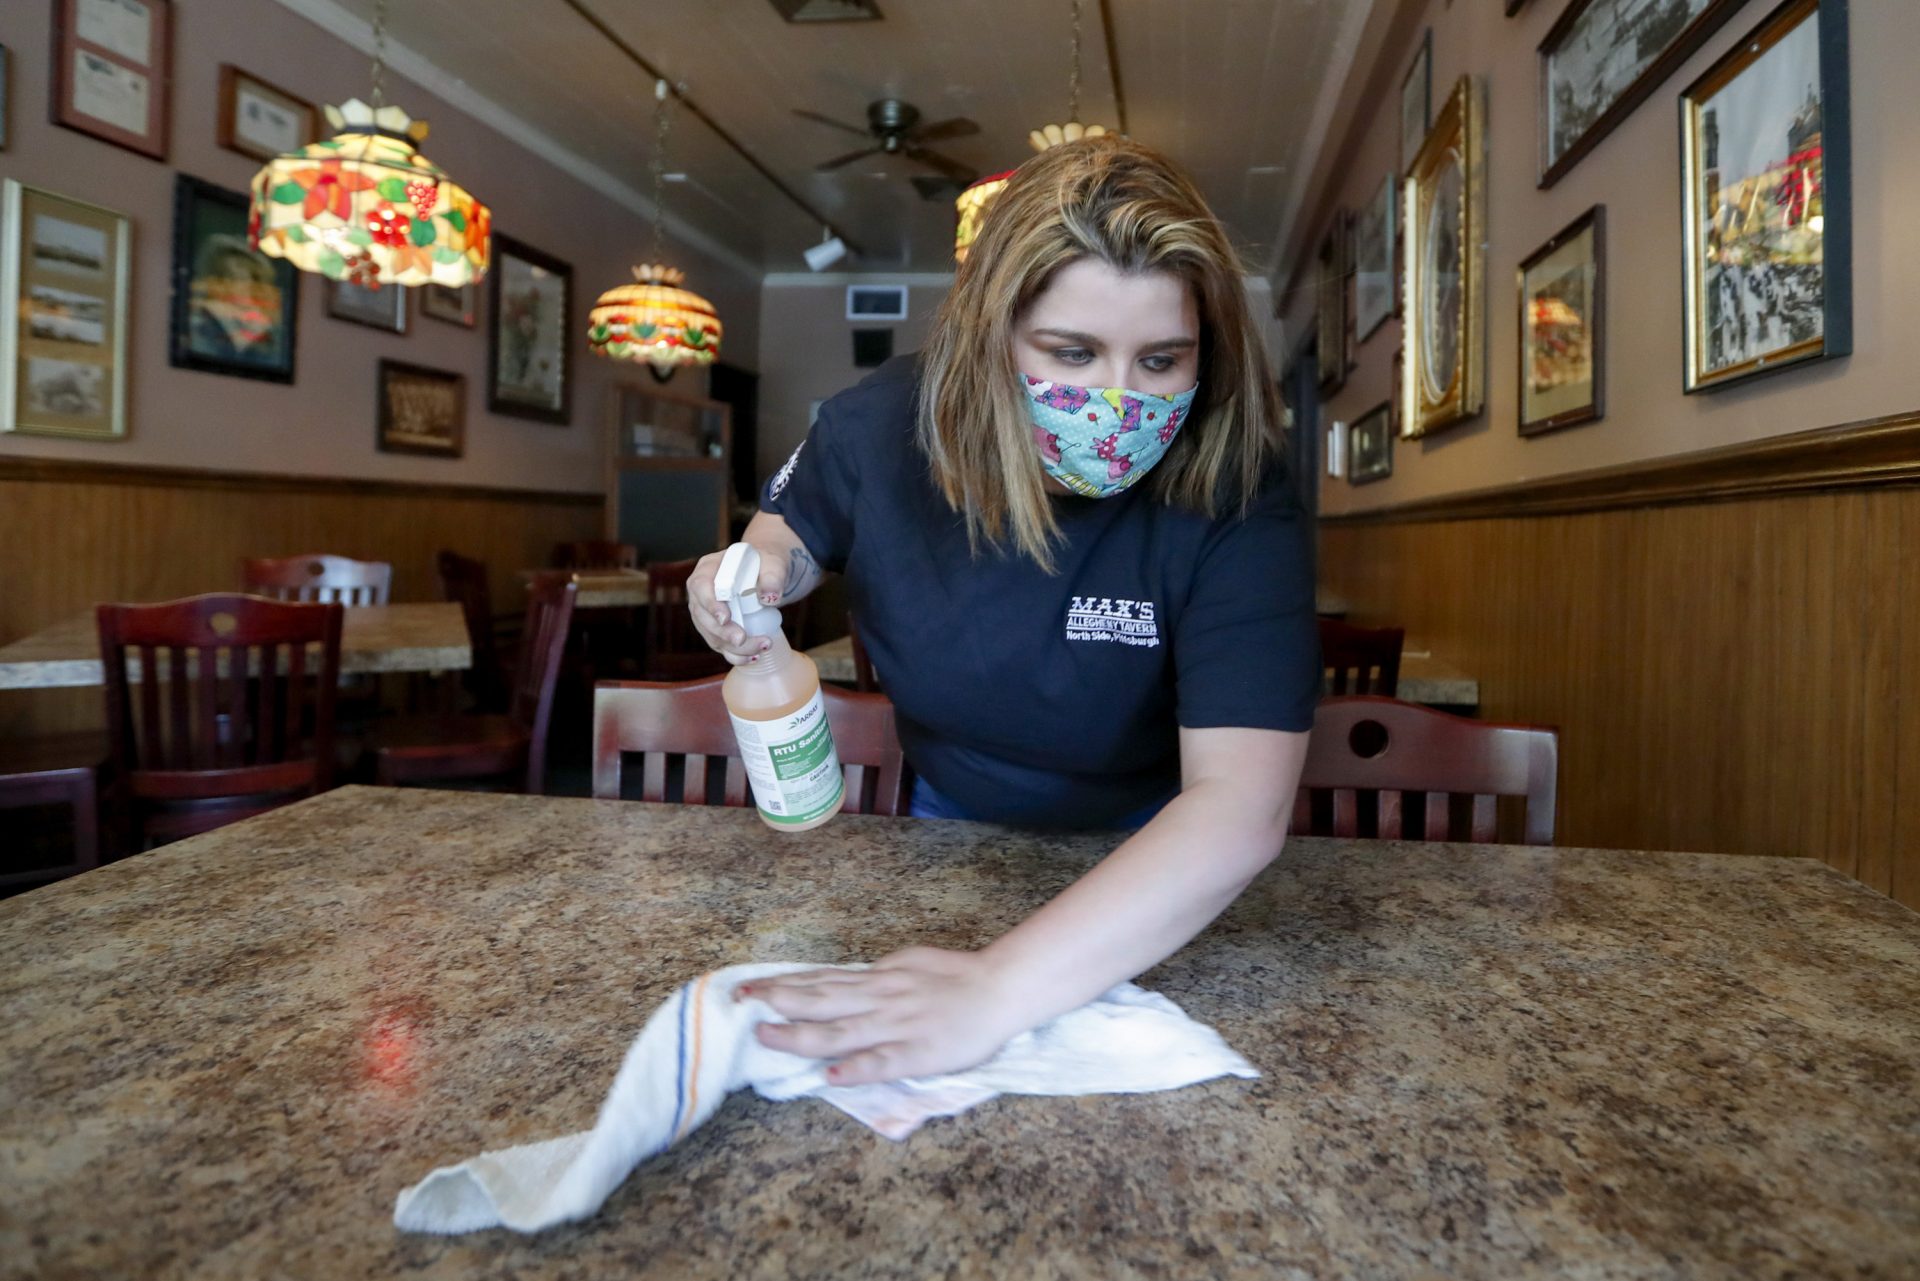 Sara Kennely, cleans one of the dining tables at Max's Allegheny Tavern, Thursday, June 4, 2020. The restaurant taped over the surfaces of some tables to restrict seating to maintain social distancing.